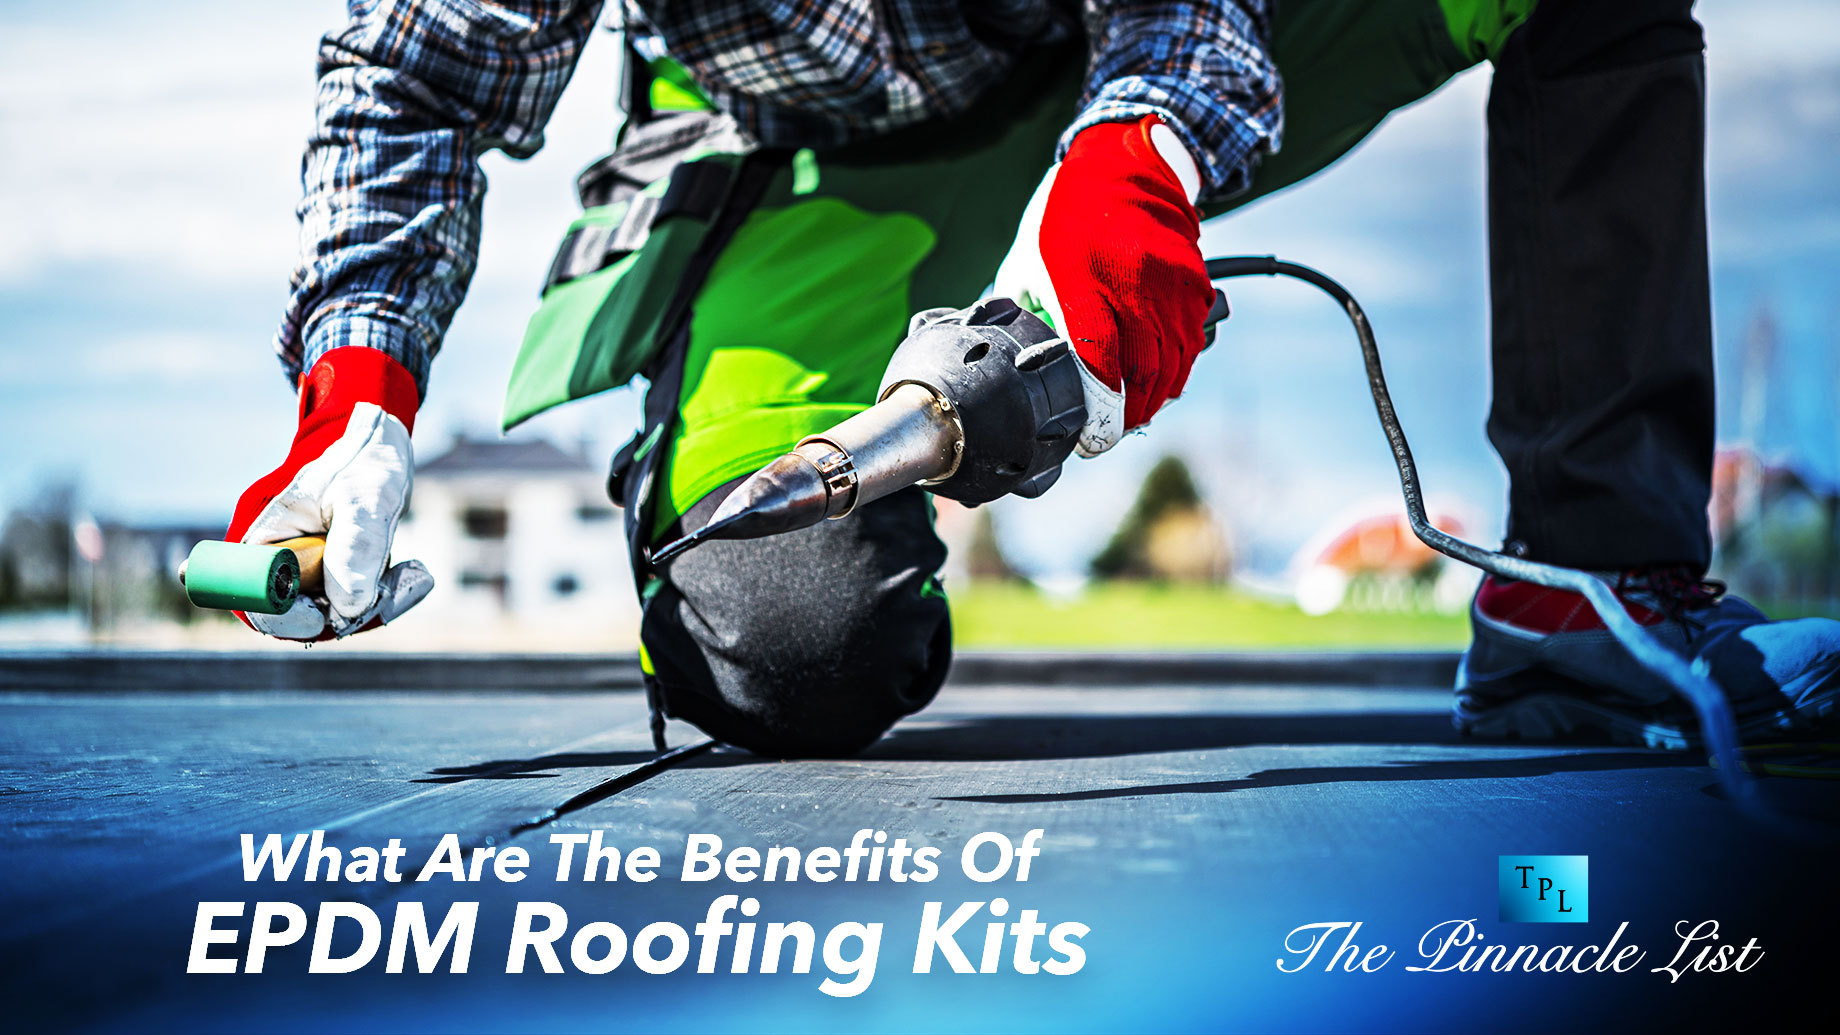 What Are The Benefits Of EPDM Roofing Kits